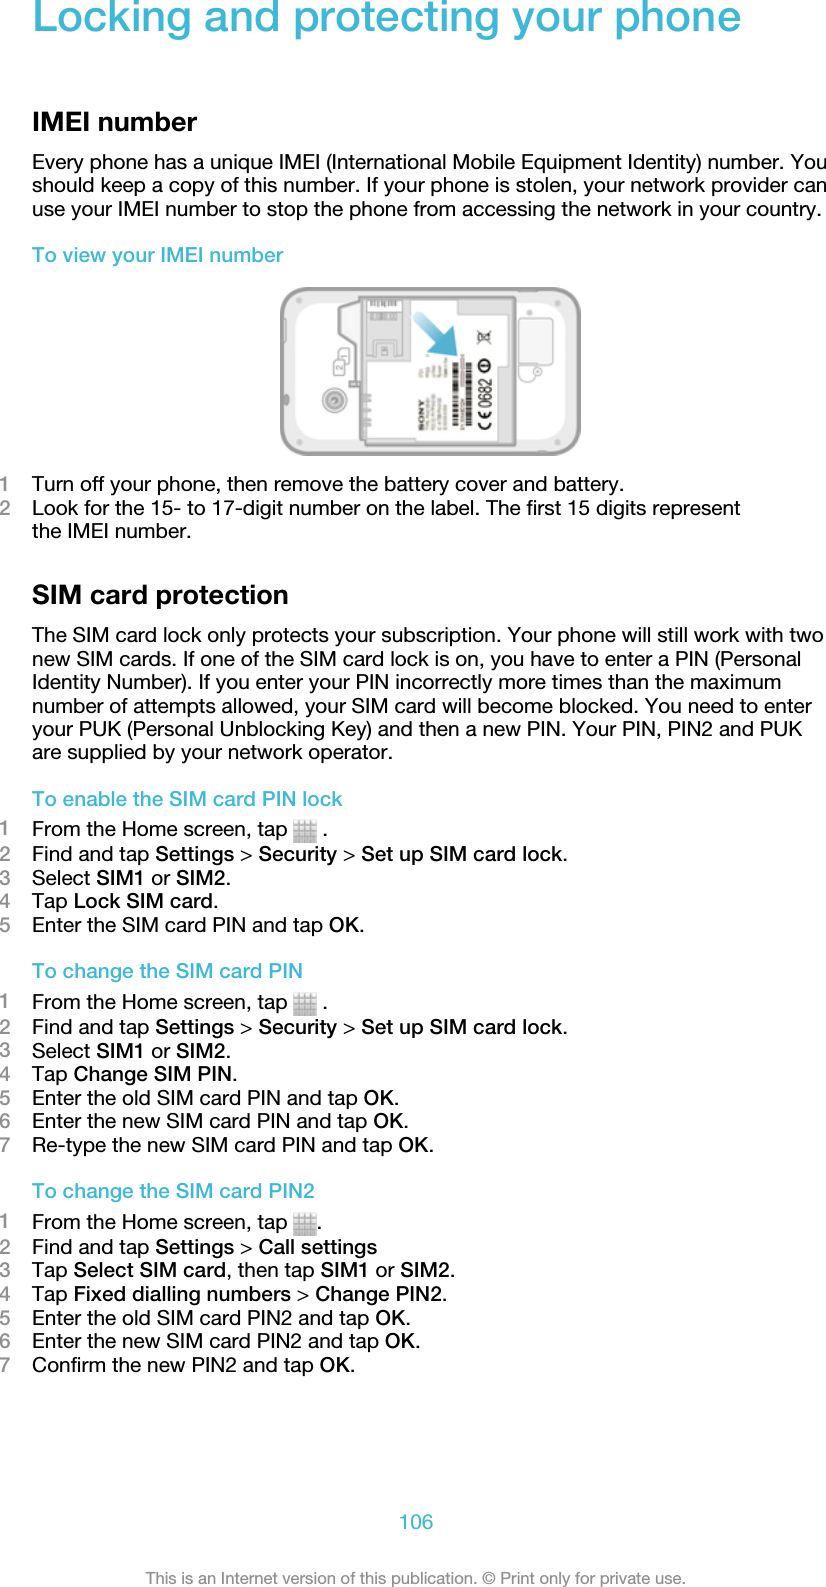 Locking and protecting your phoneIMEI numberEvery phone has a unique IMEI (International Mobile Equipment Identity) number. Youshould keep a copy of this number. If your phone is stolen, your network provider canuse your IMEI number to stop the phone from accessing the network in your country.To view your IMEI number1Turn off your phone, then remove the battery cover and battery.2Look for the 15- to 17-digit number on the label. The first 15 digits representthe IMEI number.SIM card protectionThe SIM card lock only protects your subscription. Your phone will still work with twonew SIM cards. If one of the SIM card lock is on, you have to enter a PIN (PersonalIdentity Number). If you enter your PIN incorrectly more times than the maximumnumber of attempts allowed, your SIM card will become blocked. You need to enteryour PUK (Personal Unblocking Key) and then a new PIN. Your PIN, PIN2 and PUKare supplied by your network operator.To enable the SIM card PIN lock1From the Home screen, tap   .2Find and tap Settings &gt; Security &gt; Set up SIM card lock.3Select SIM1 or SIM2.4Tap Lock SIM card.5Enter the SIM card PIN and tap OK.To change the SIM card PIN1From the Home screen, tap   .2Find and tap Settings &gt; Security &gt; Set up SIM card lock.3Select SIM1 or SIM2.4Tap Change SIM PIN.5Enter the old SIM card PIN and tap OK.6Enter the new SIM card PIN and tap OK.7Re-type the new SIM card PIN and tap OK.To change the SIM card PIN21From the Home screen, tap  .2Find and tap Settings &gt; Call settings3Tap Select SIM card, then tap SIM1 or SIM2.4Tap Fixed dialling numbers &gt; Change PIN2.5Enter the old SIM card PIN2 and tap OK.6Enter the new SIM card PIN2 and tap OK.7Confirm the new PIN2 and tap OK.106This is an Internet version of this publication. © Print only for private use.